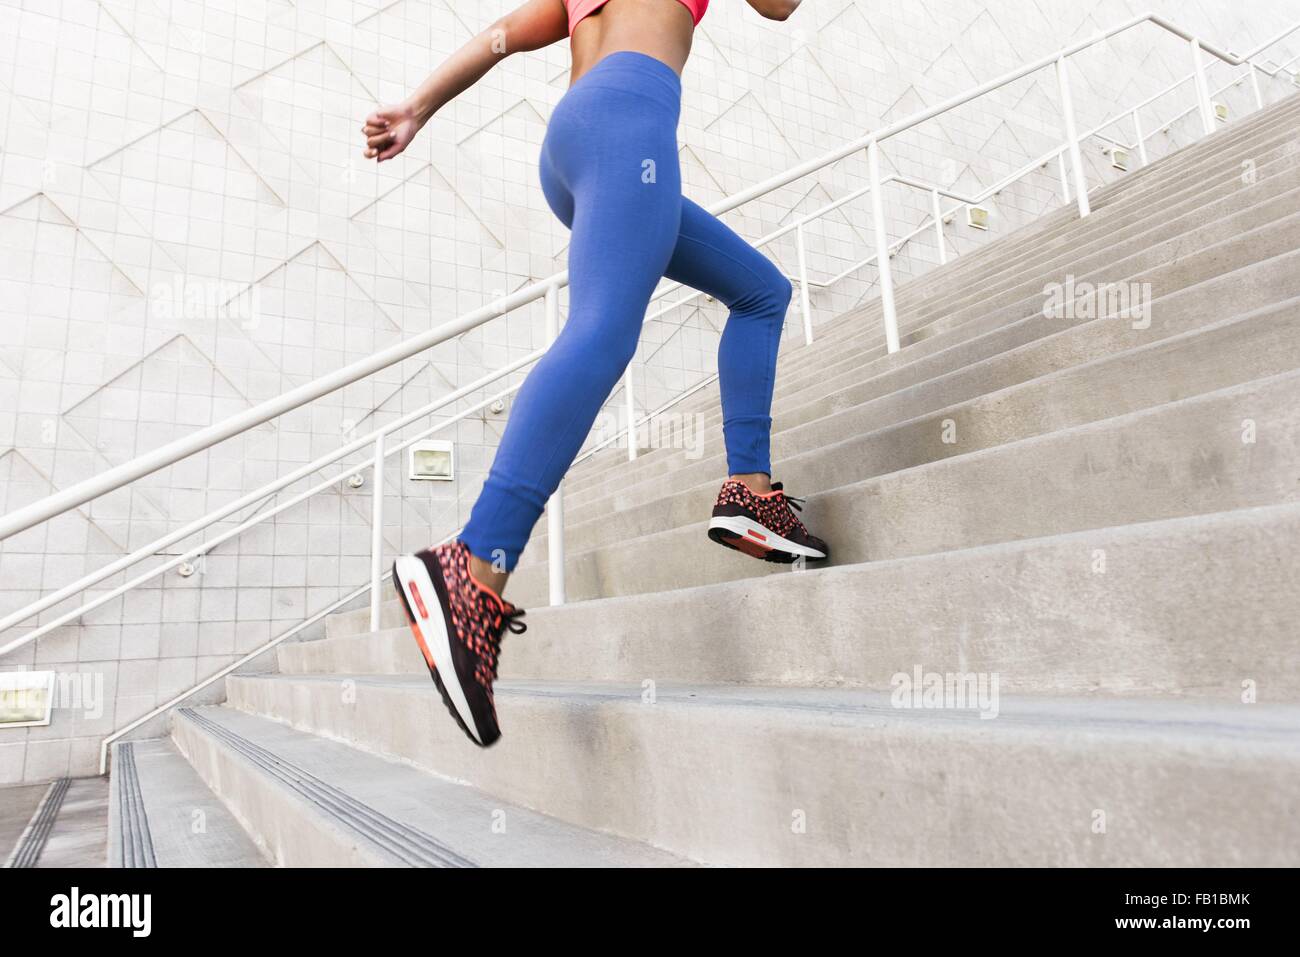 Low angle rear view of young woman, wearing sports clothing running up stairs Stock Photo